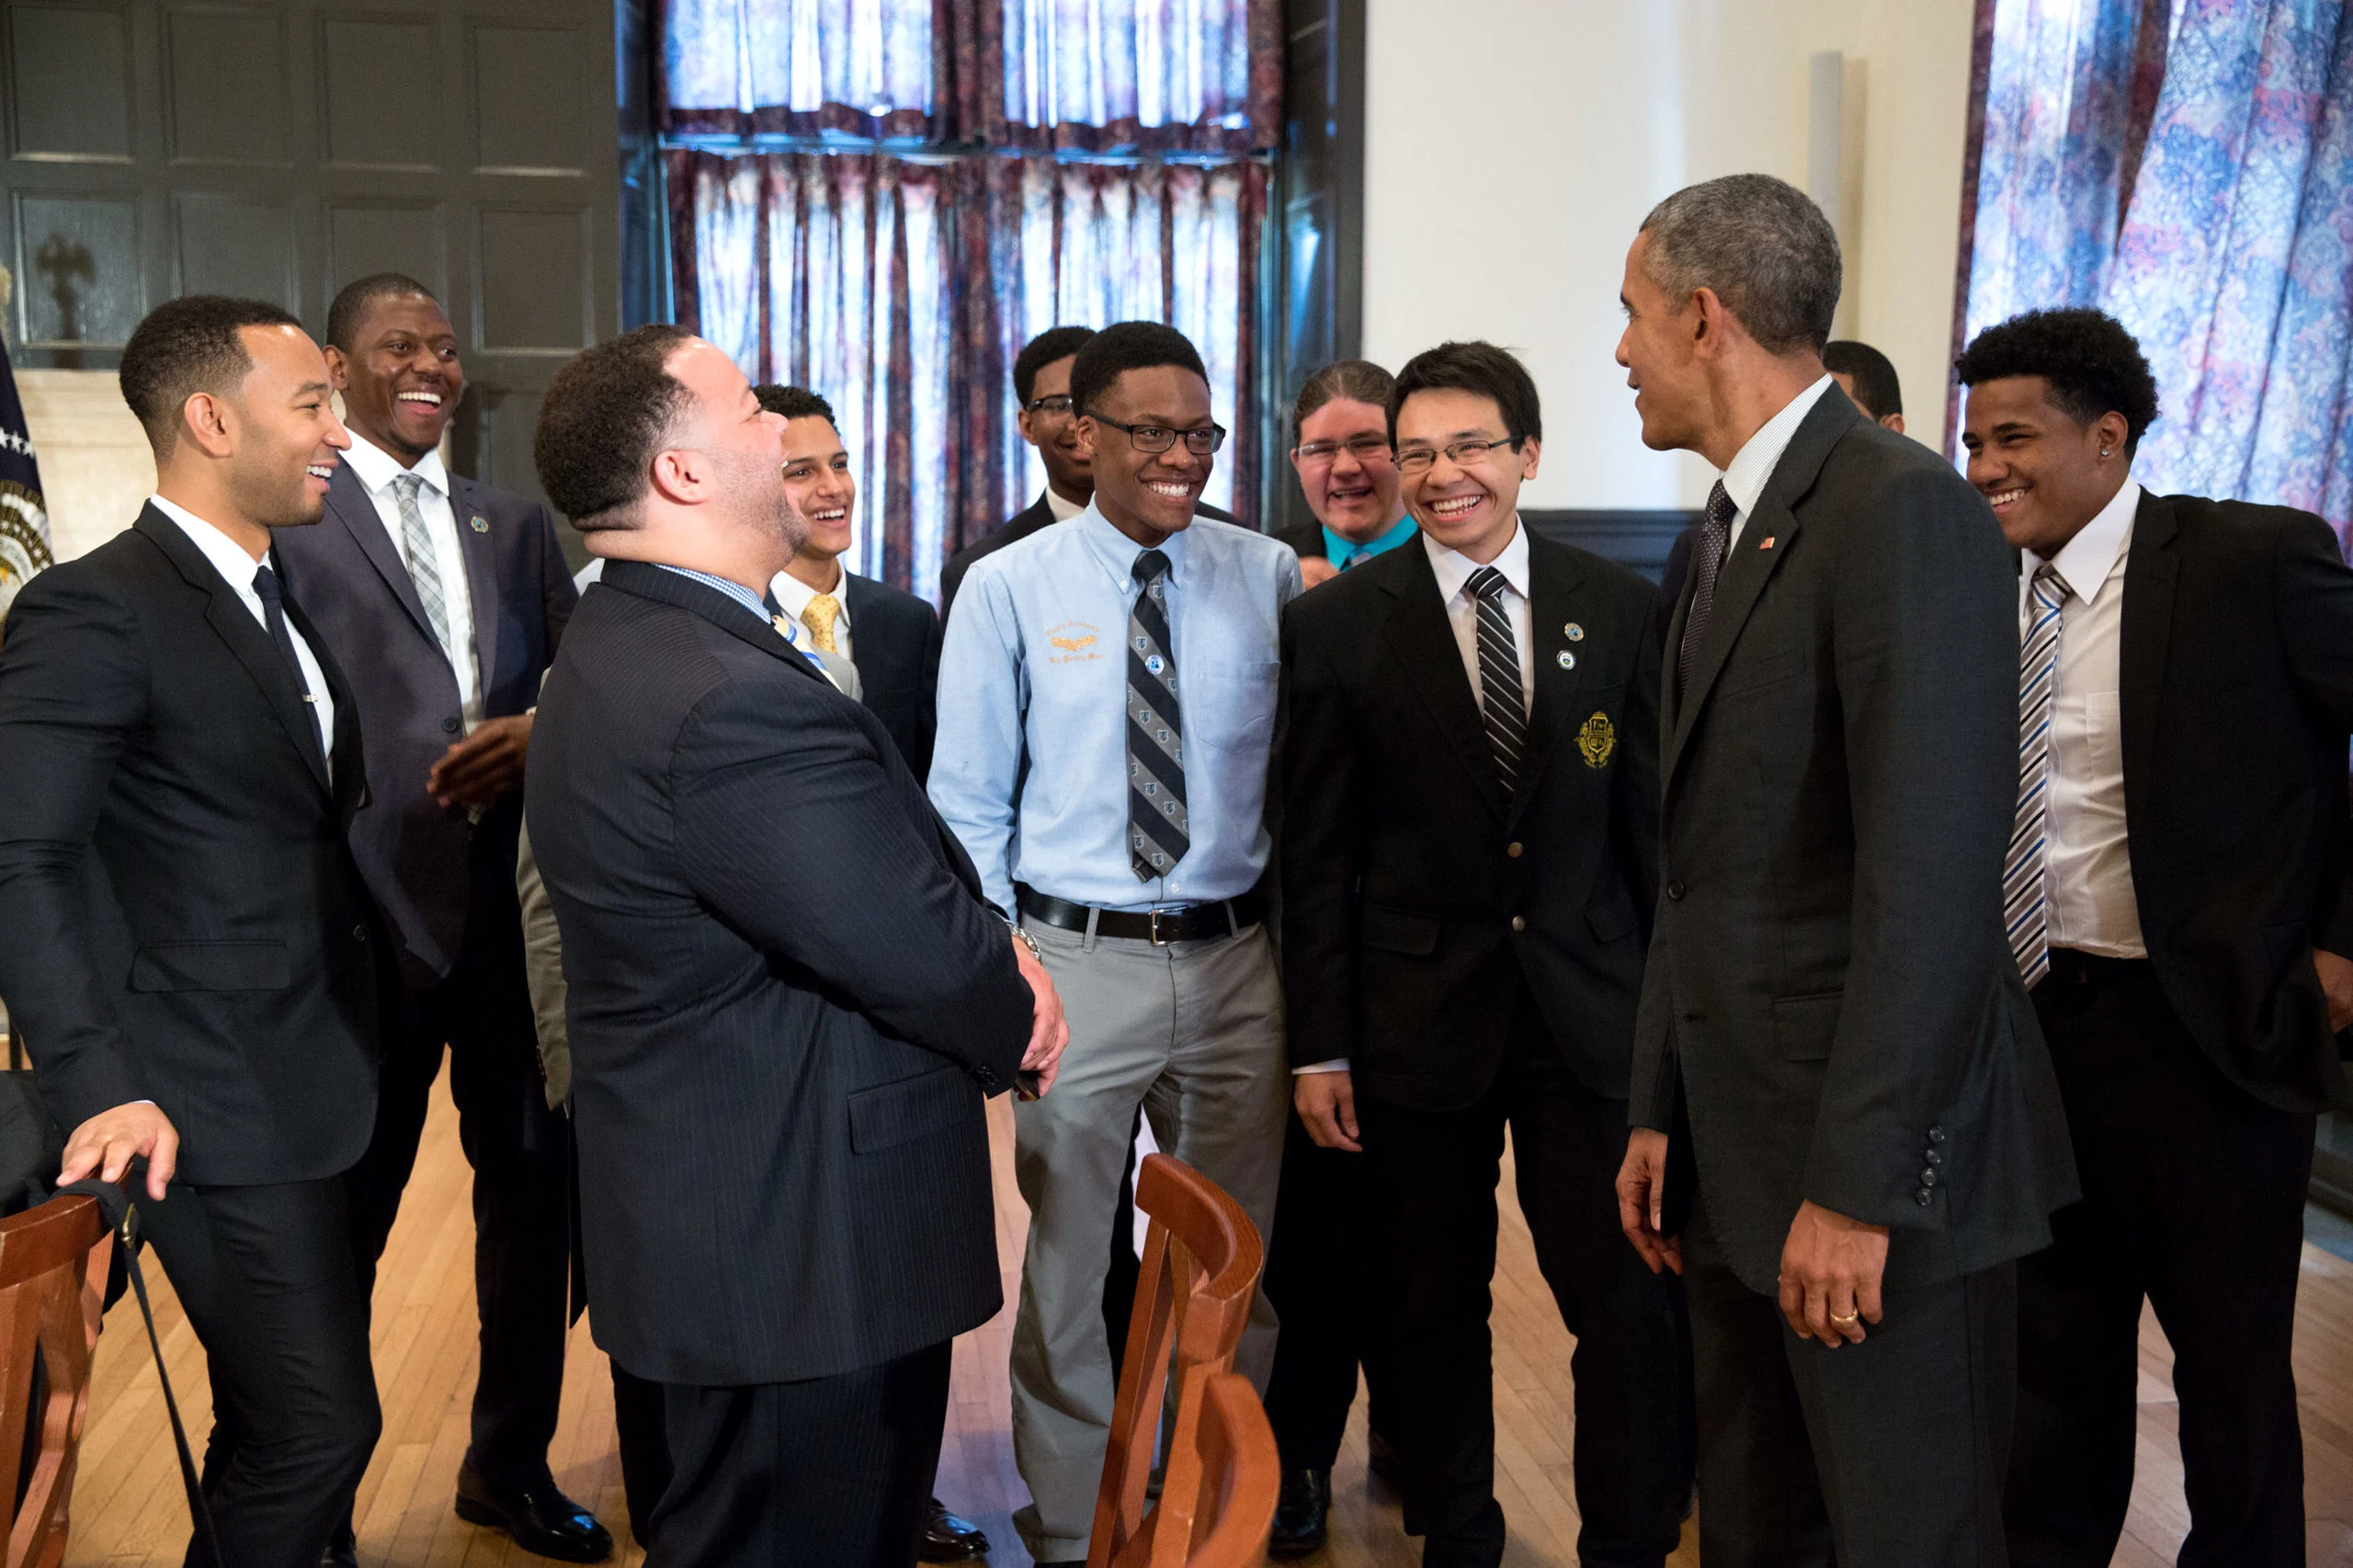 This picture shows President Obama in a room full of men wearing business professional clothes, 
laughing and smiling together.